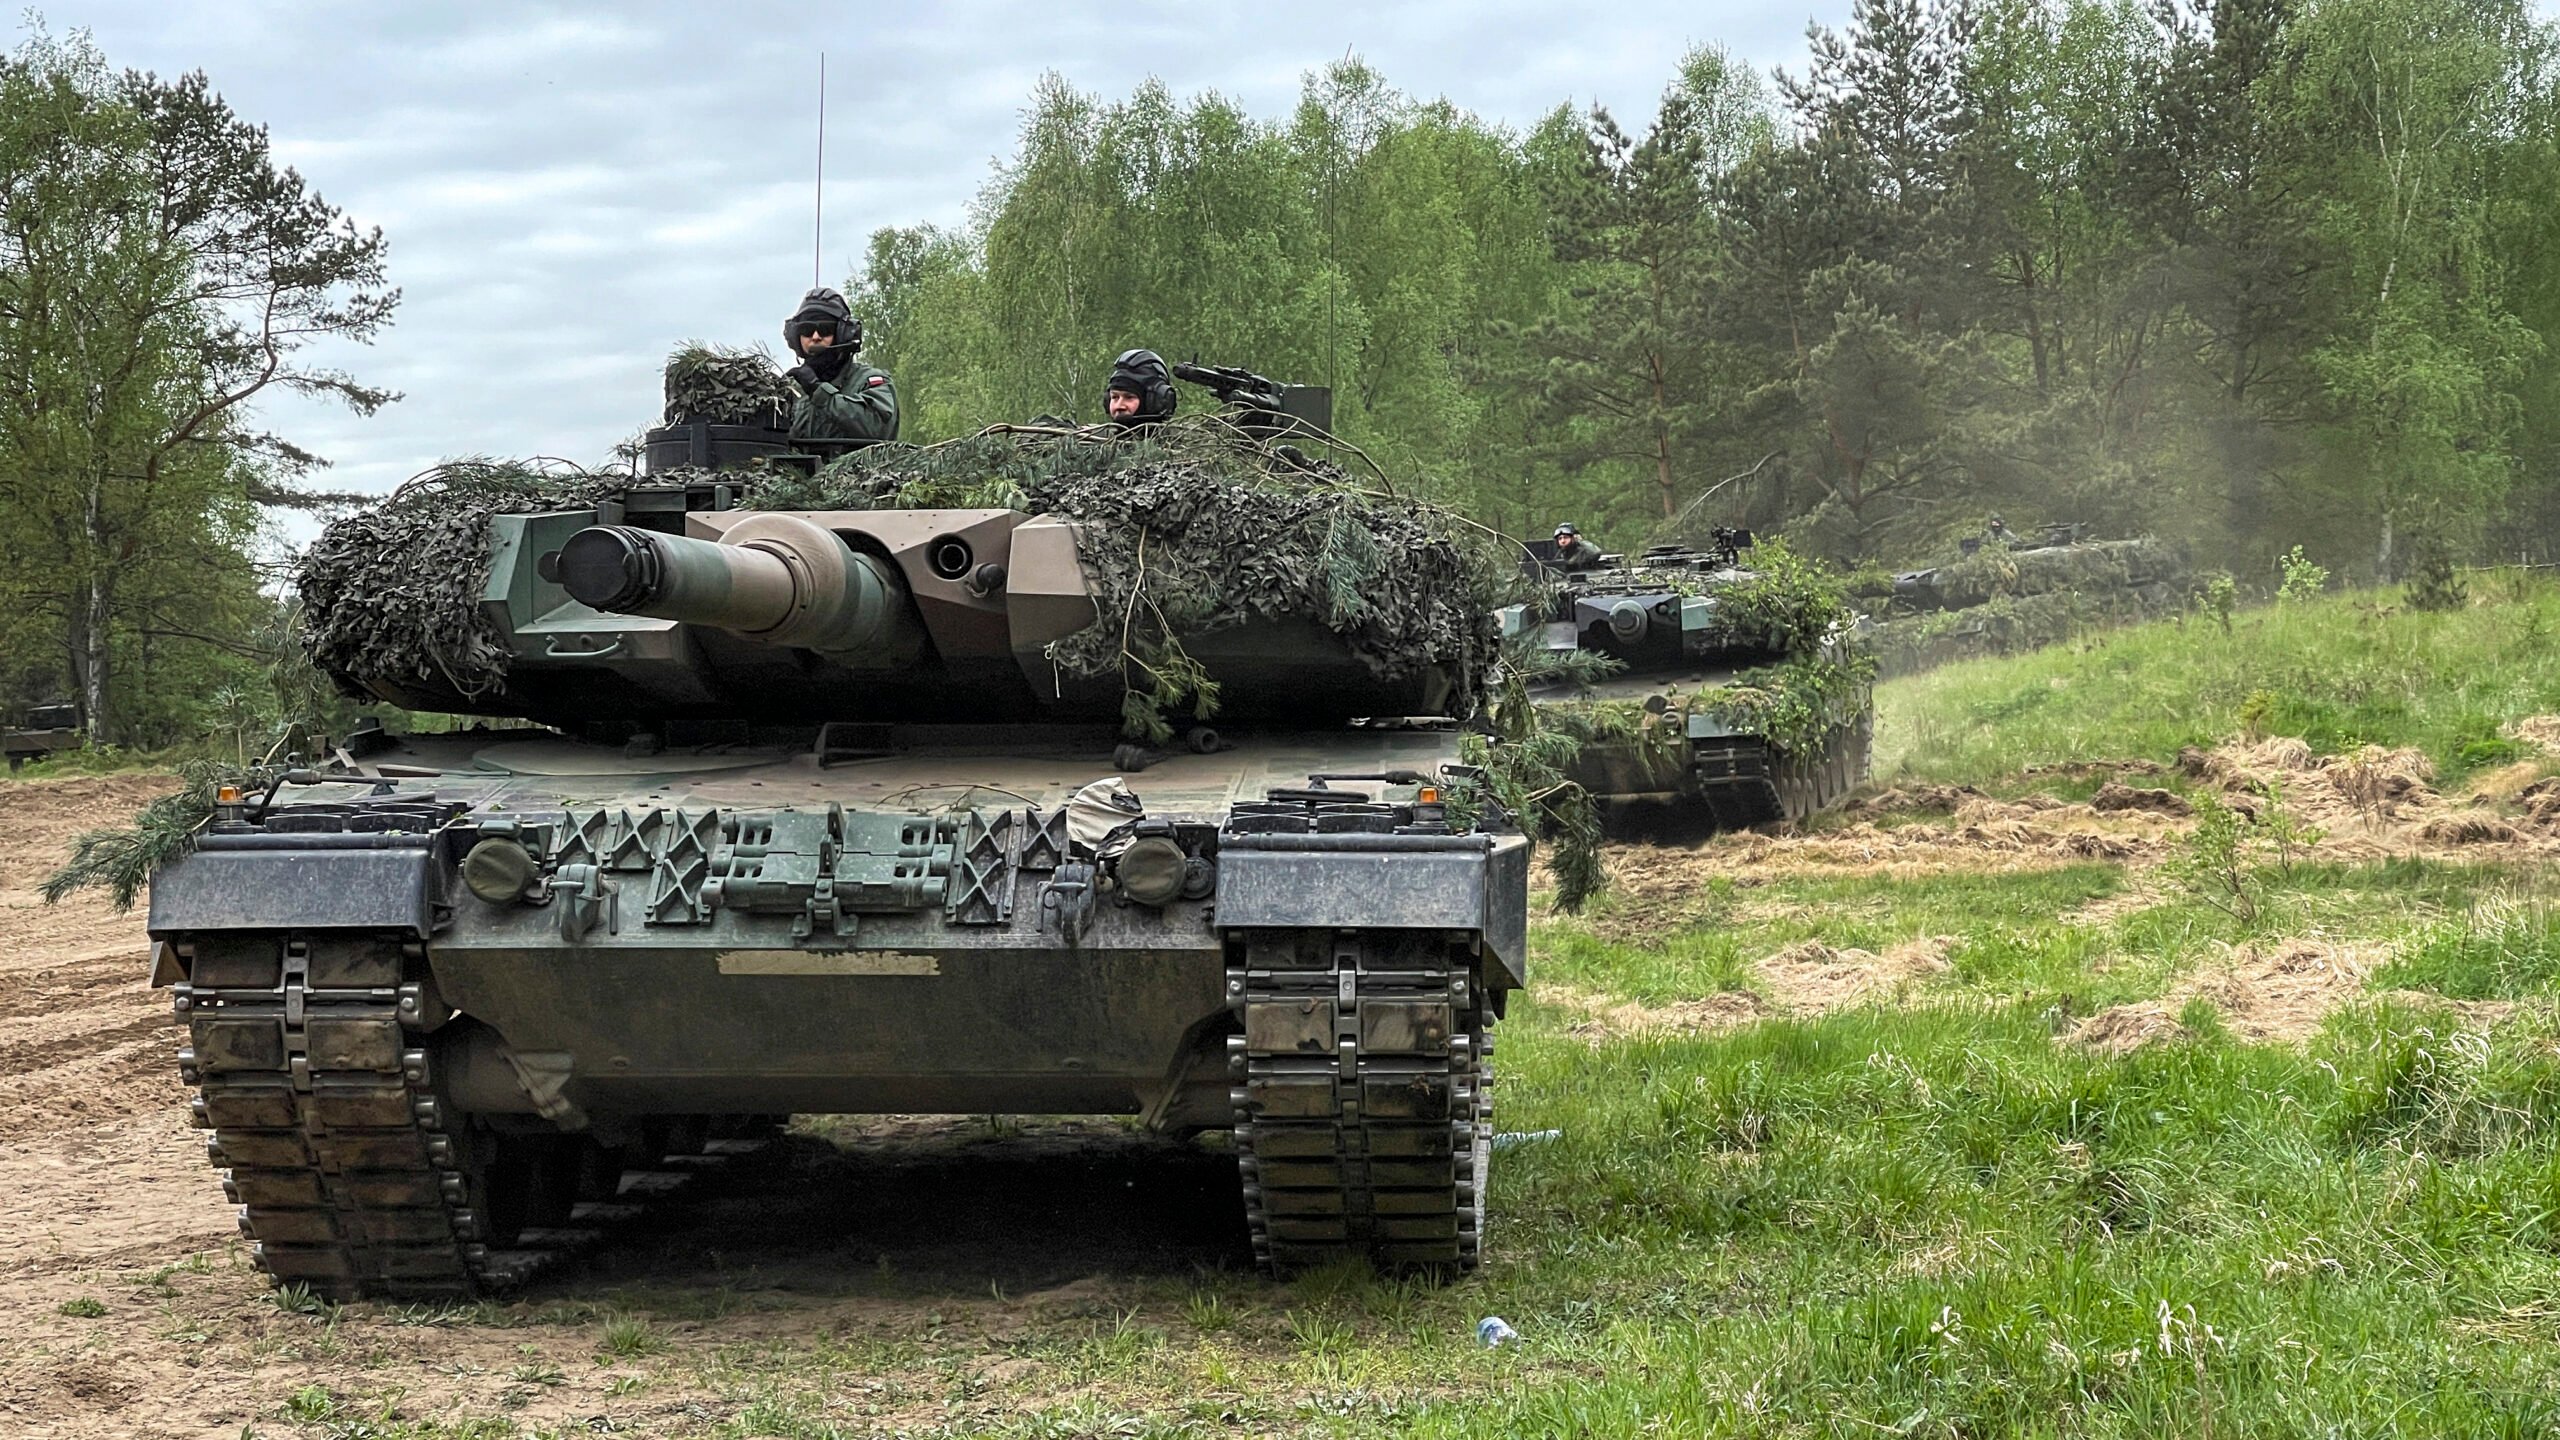 It's official: Poland transfers 14 German Leopard 2 tanks to Ukraine (updated)